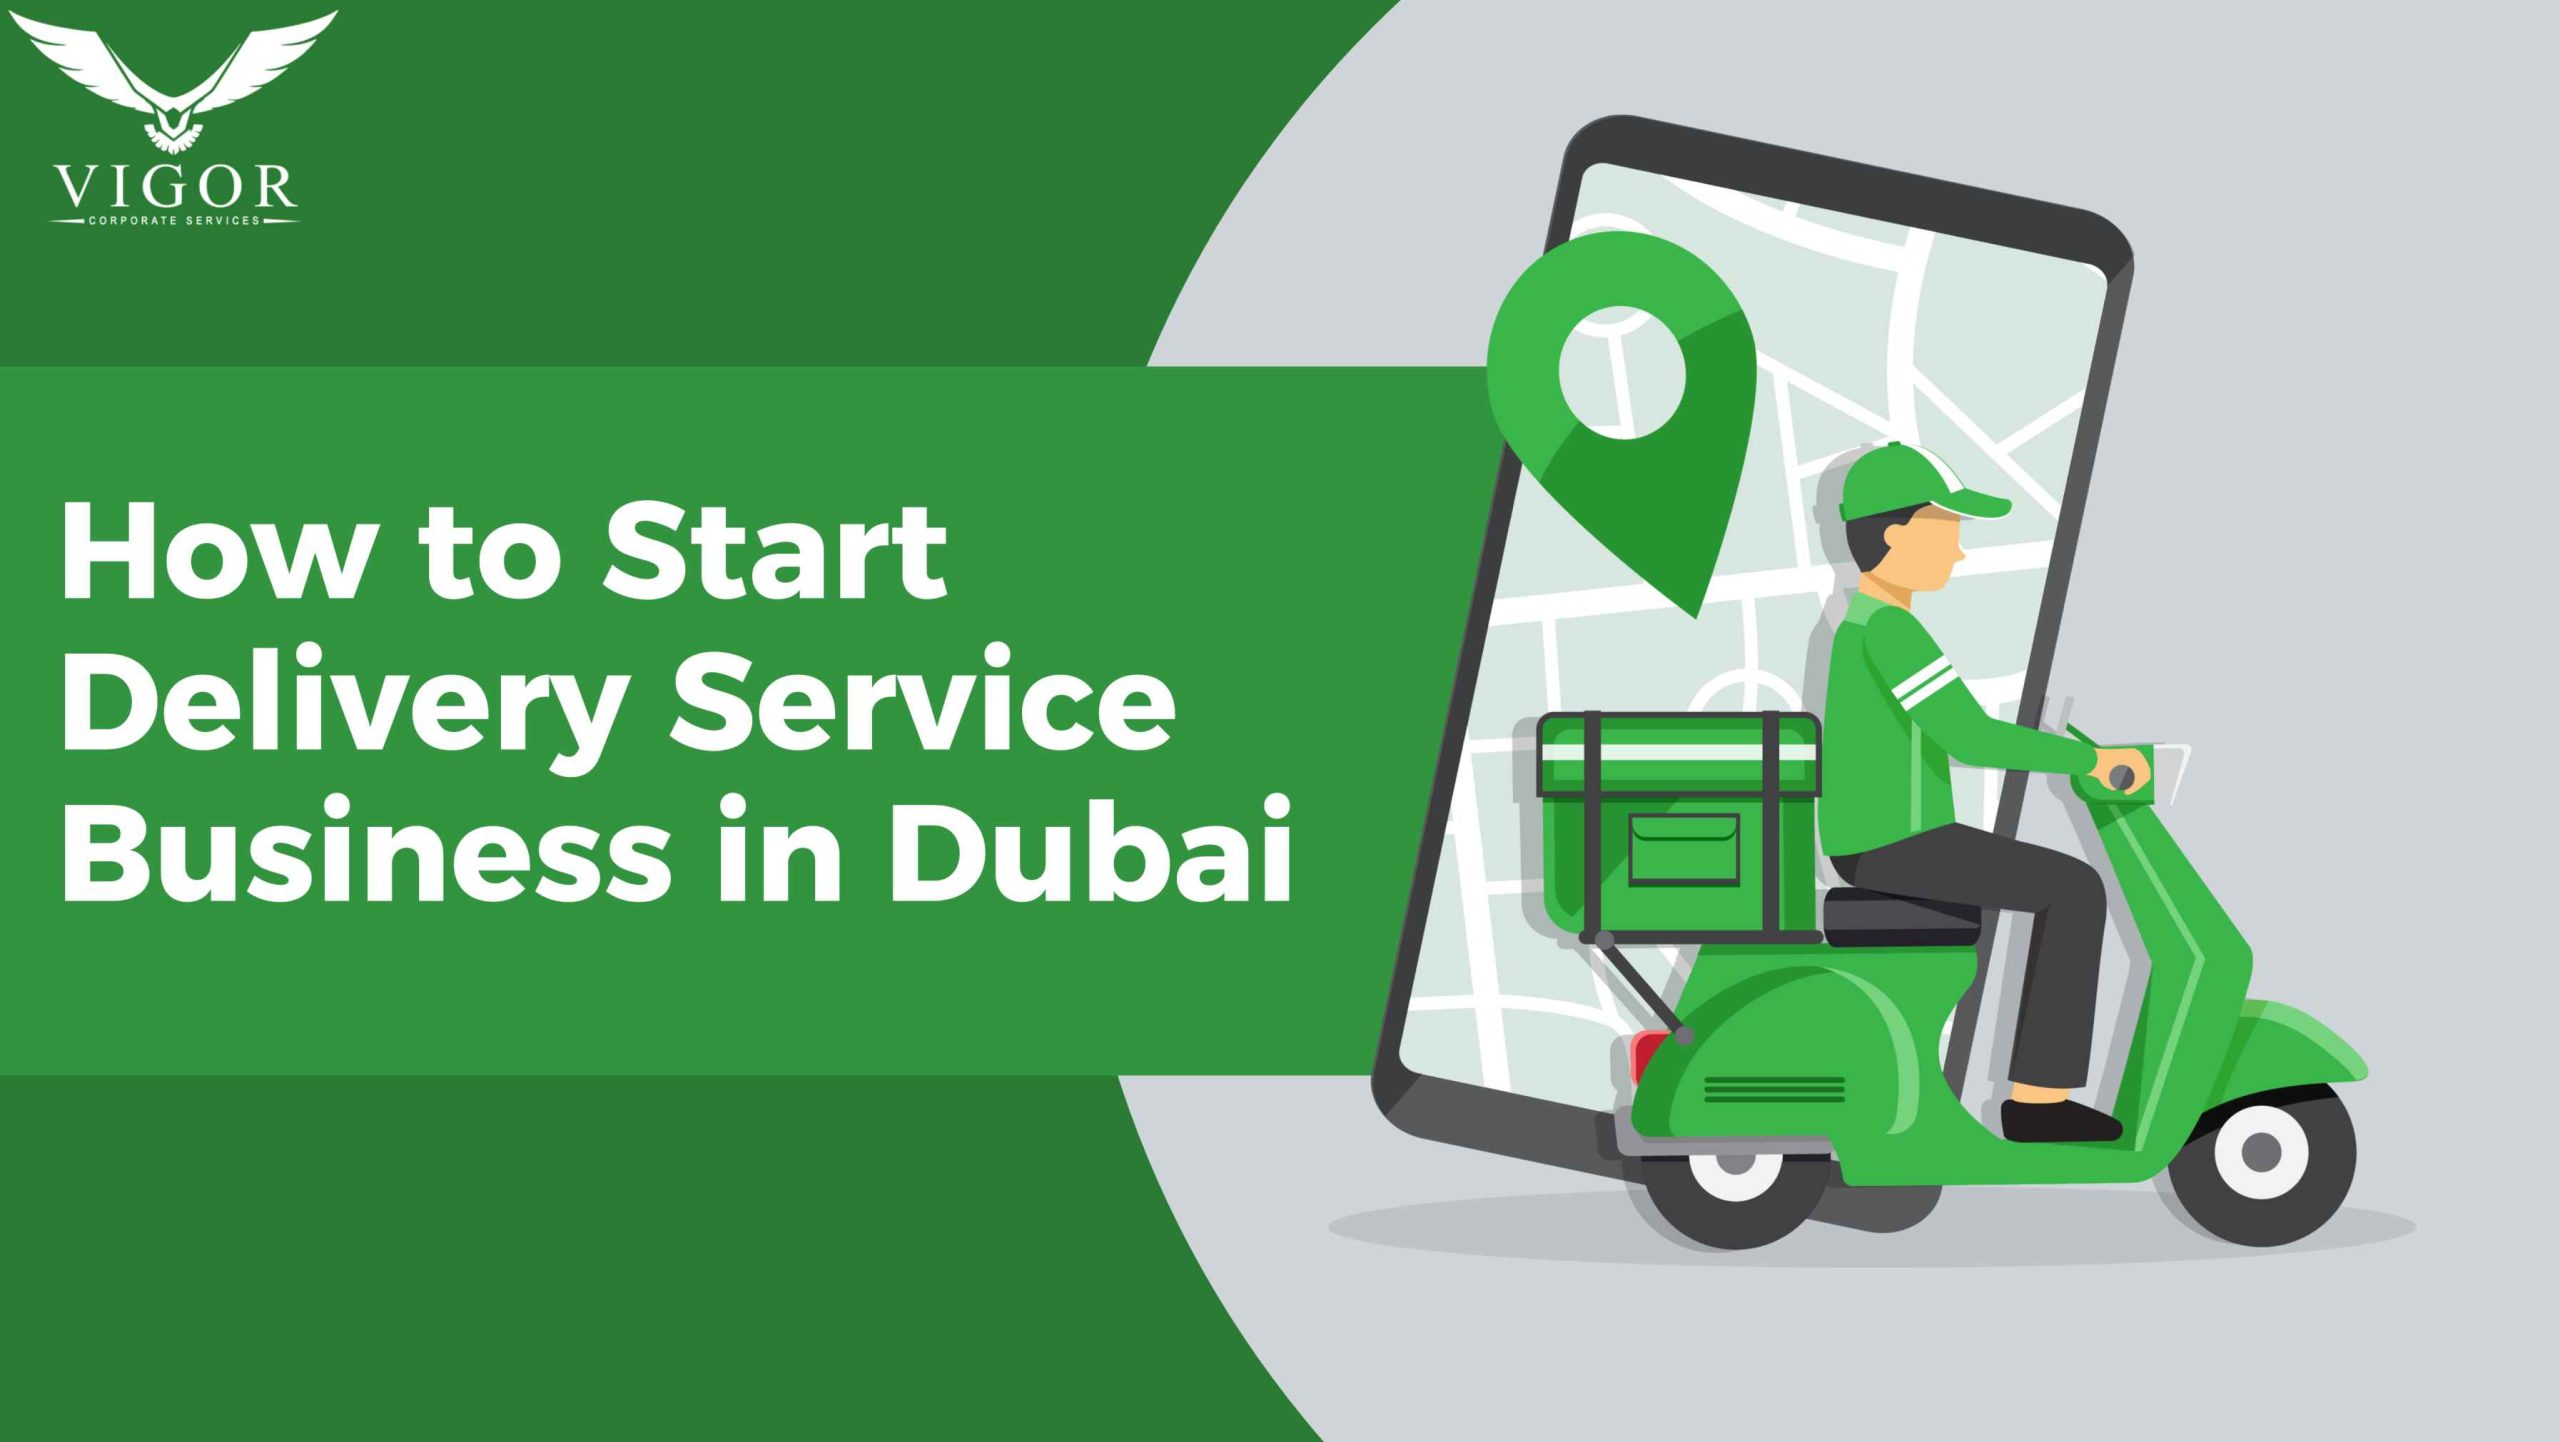 How to Start Delivery Service Business in Dubai